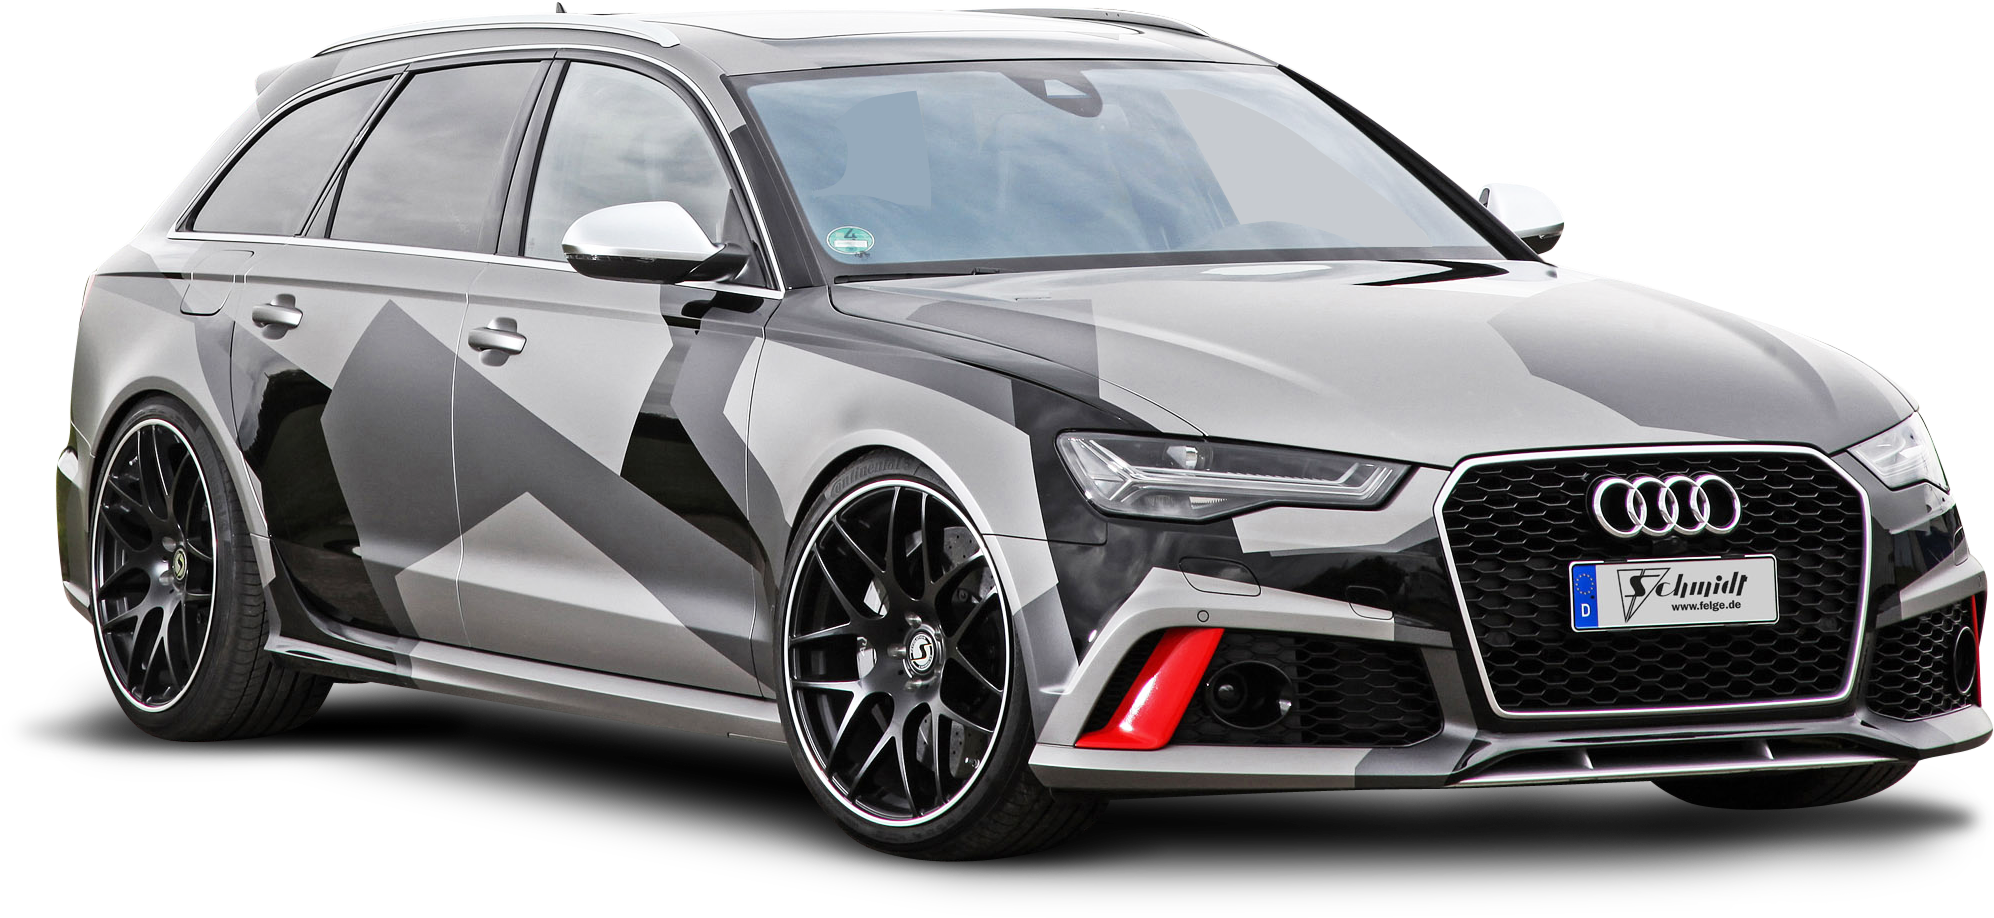 Free Icons Png - Audi Rs6 Avant Camouflage (2172x1095), Png Download